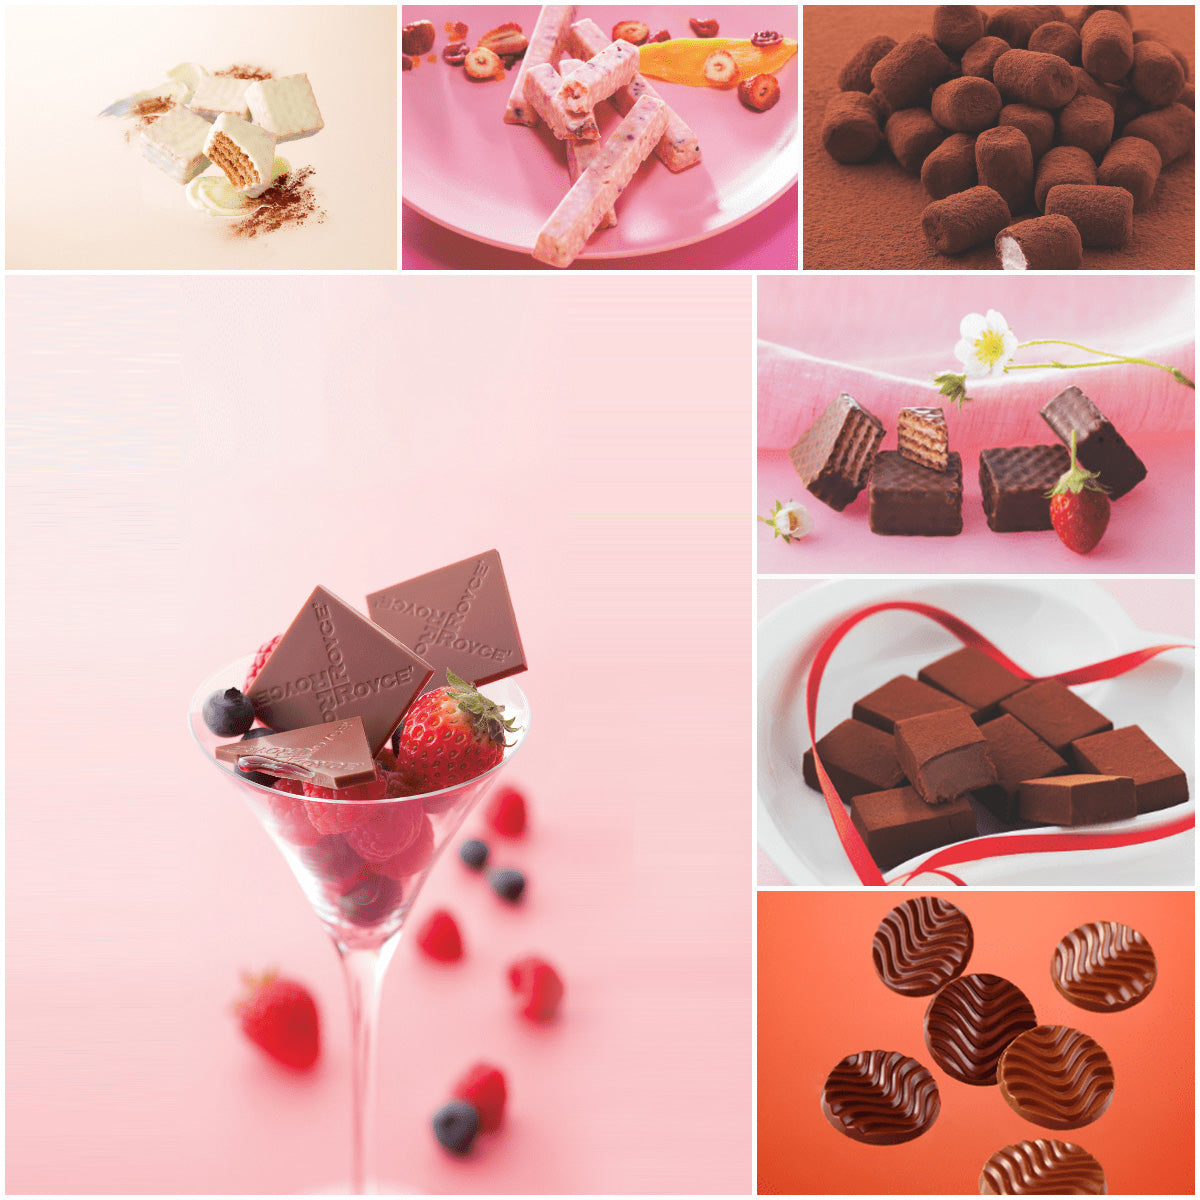 ROYCE' Chocolate - ROYCE' Luxe Gift Set - Clockwise from top: white chocolate wafers with light brown background; pink chocolate bars with fruits on a pink plate; brown chocolate-coated marshmallows; brown chocolate wafers with strawberries and flowers and pink background; brown chocolate blocks on a white plate with red heart-shaped ribbon; brown chocolate discs with a red-orange background; and brown chocolate squares with fruits in a cocktail glass with pink background.